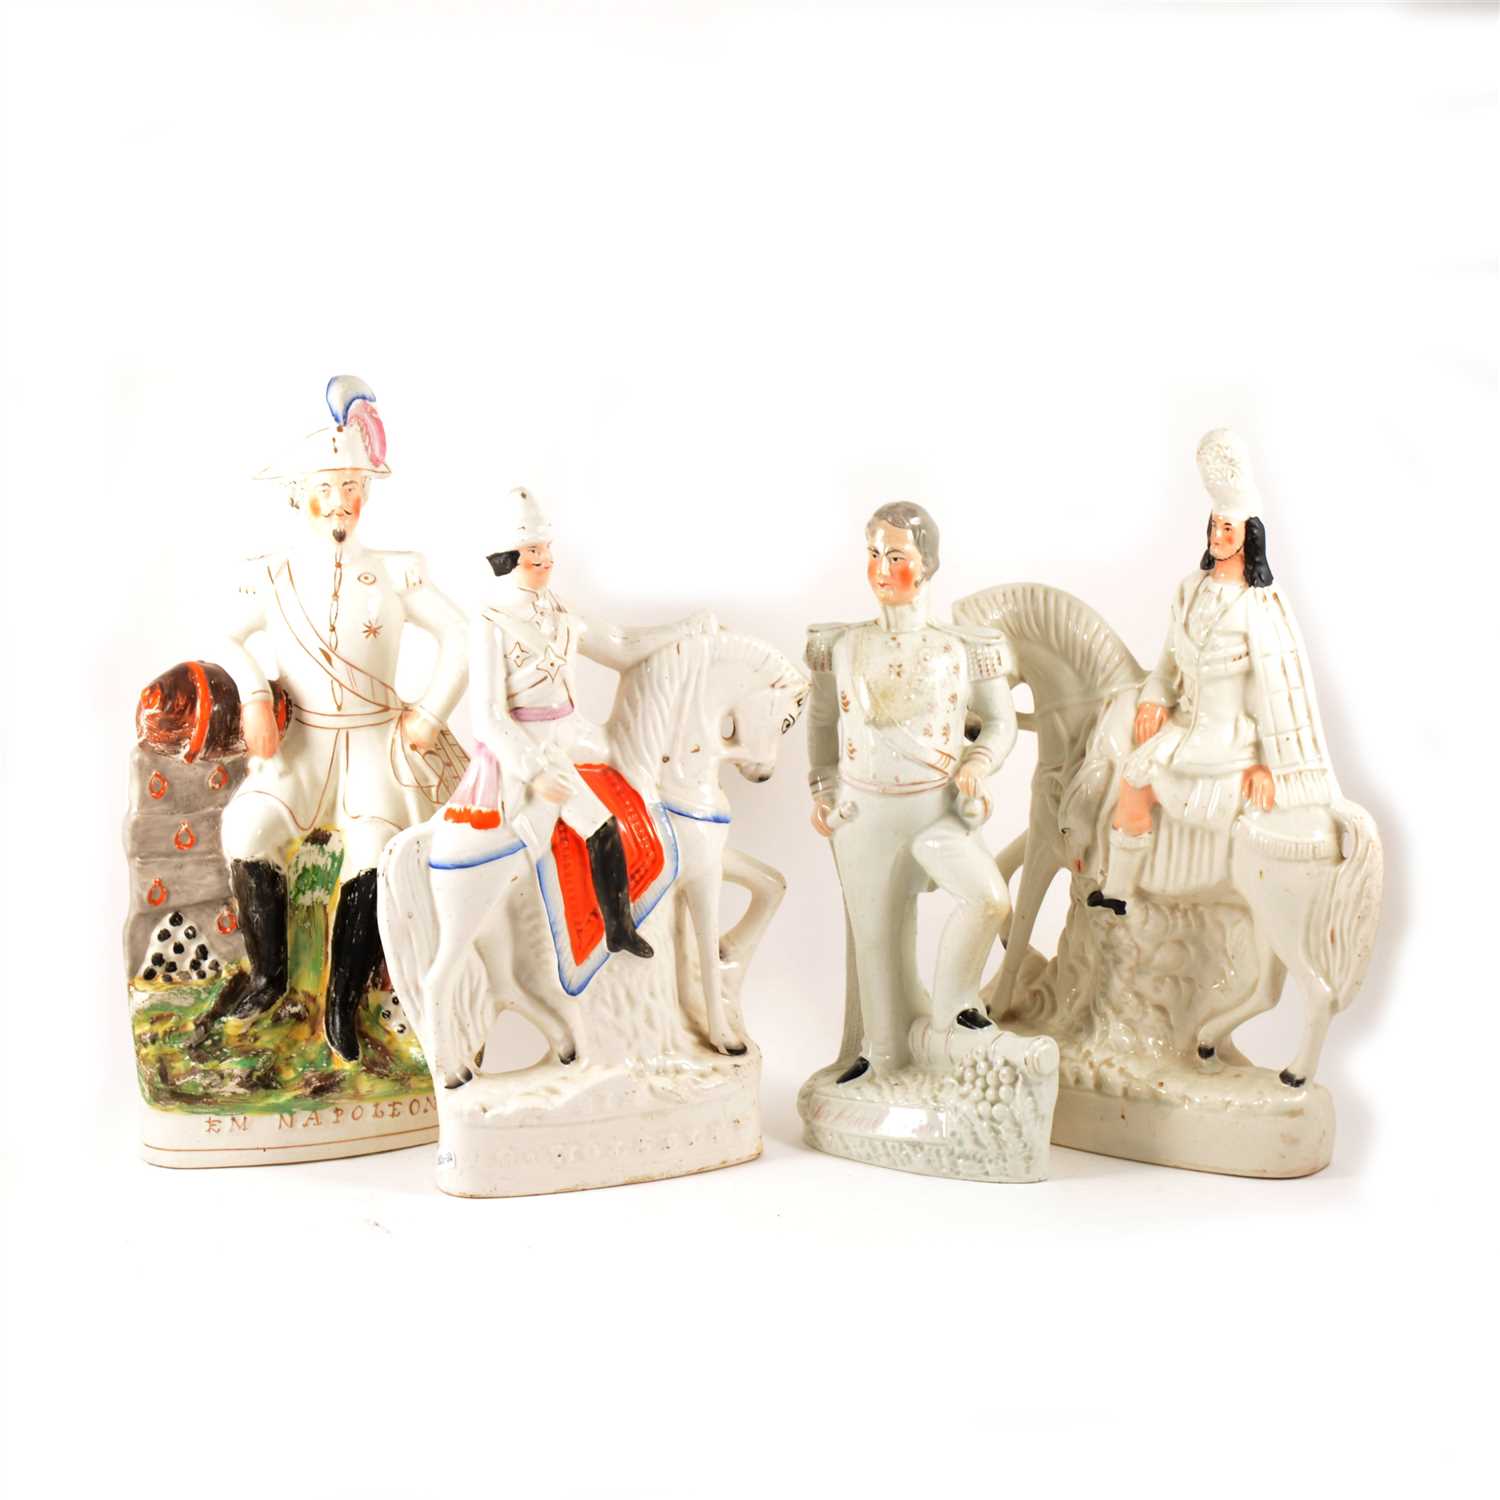 Lot 31 - A Staffordshire figure, Emperor Napoleon, and four other Staffordshire figures.